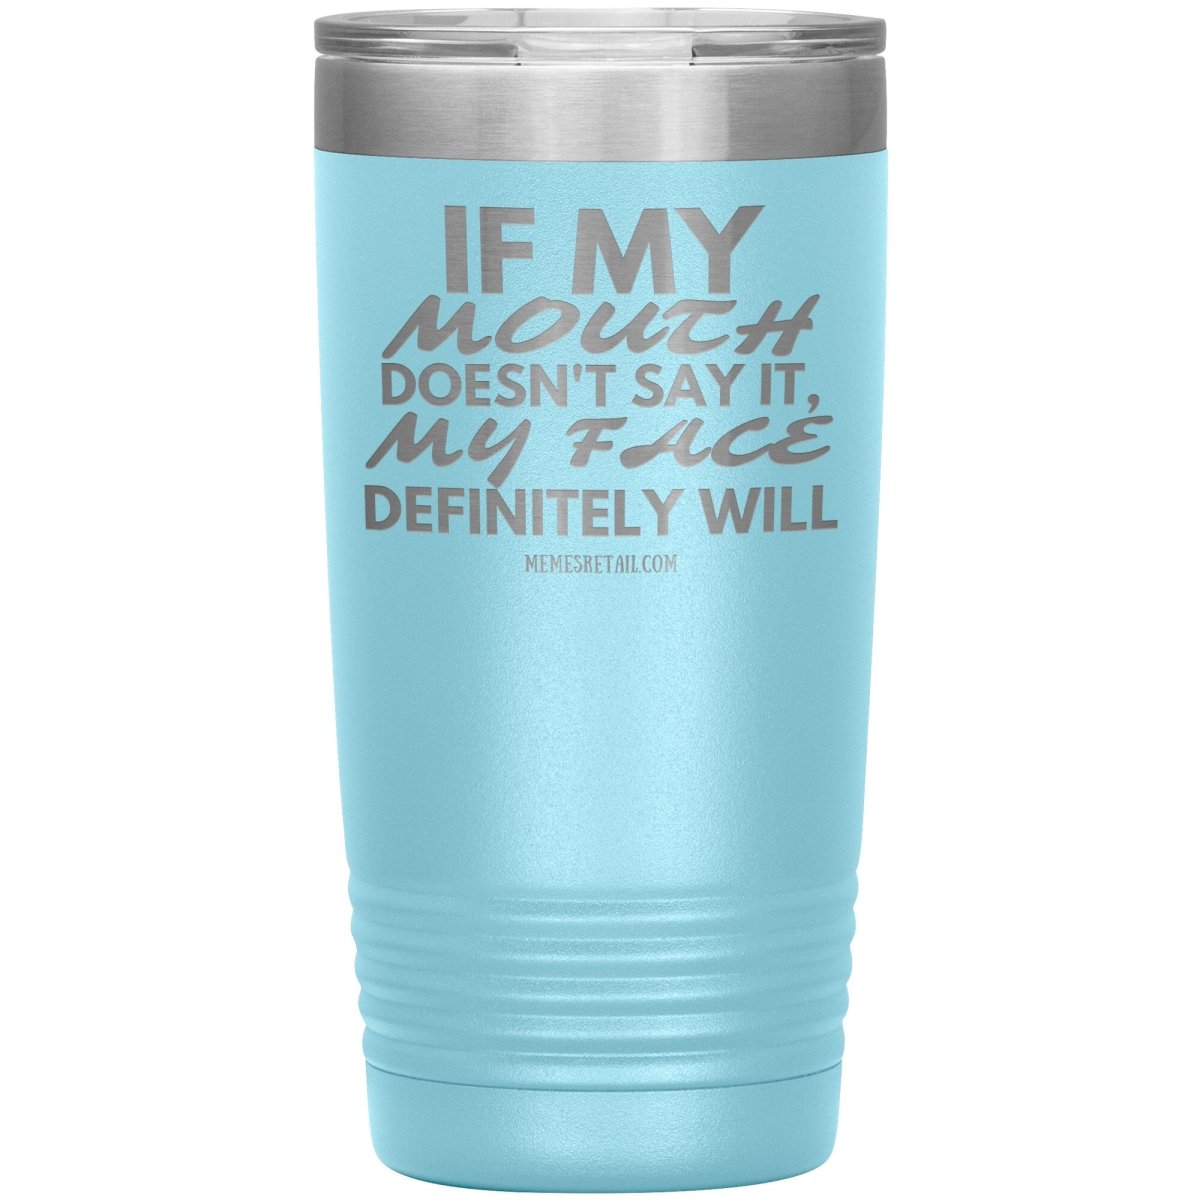 If my mouth doesn't say it, my face definitely will Tumblers, 20oz Insulated Tumbler / Light Blue - MemesRetail.com